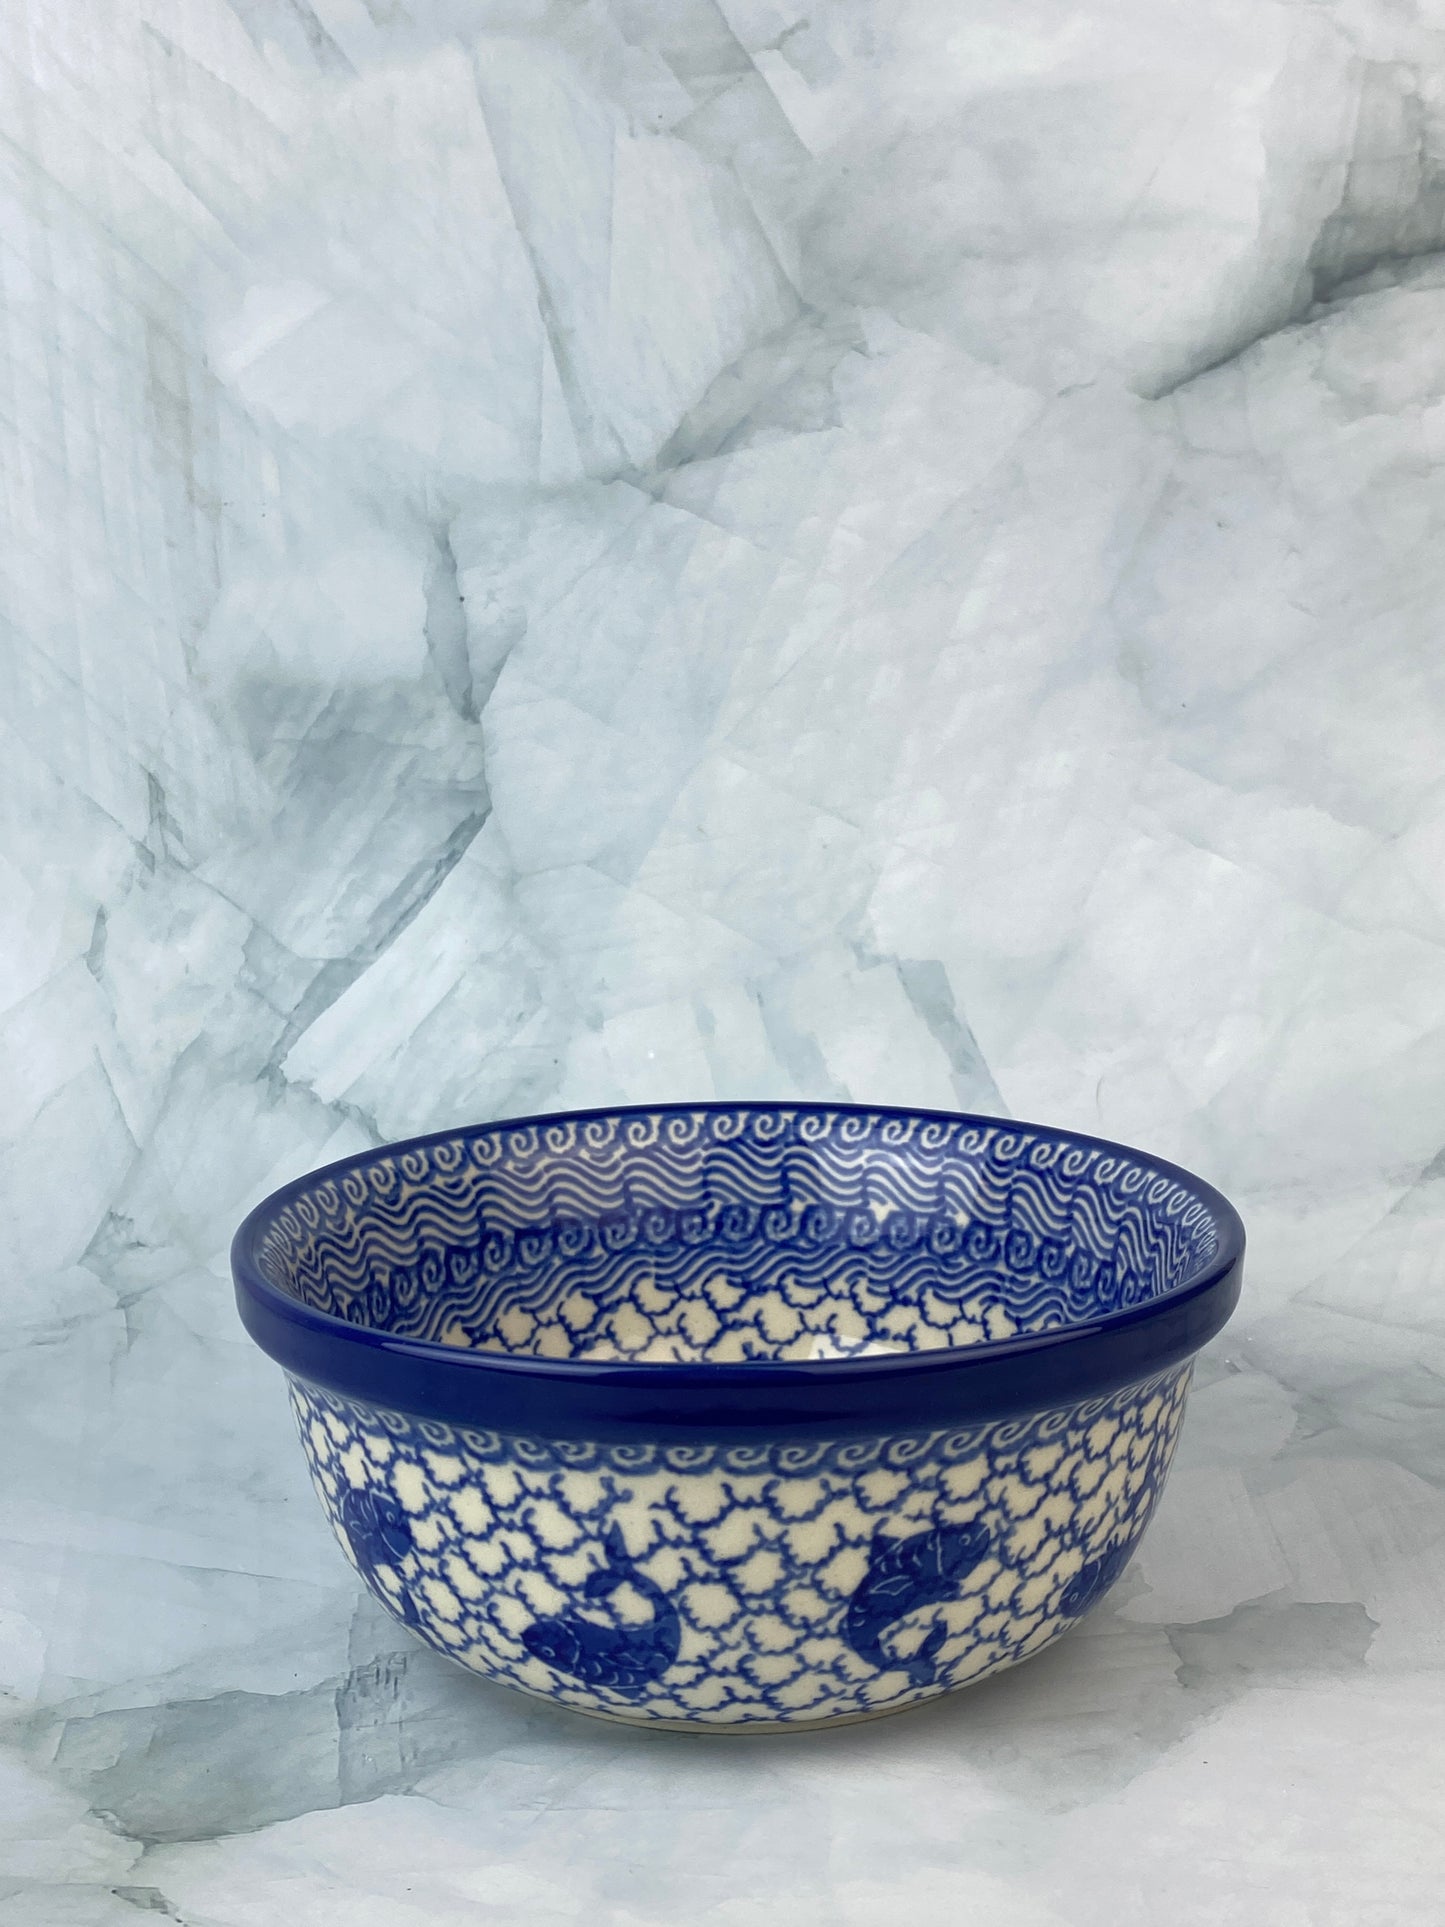 Cereal / Berry Bowl - Shape 209 - Pattern 2386